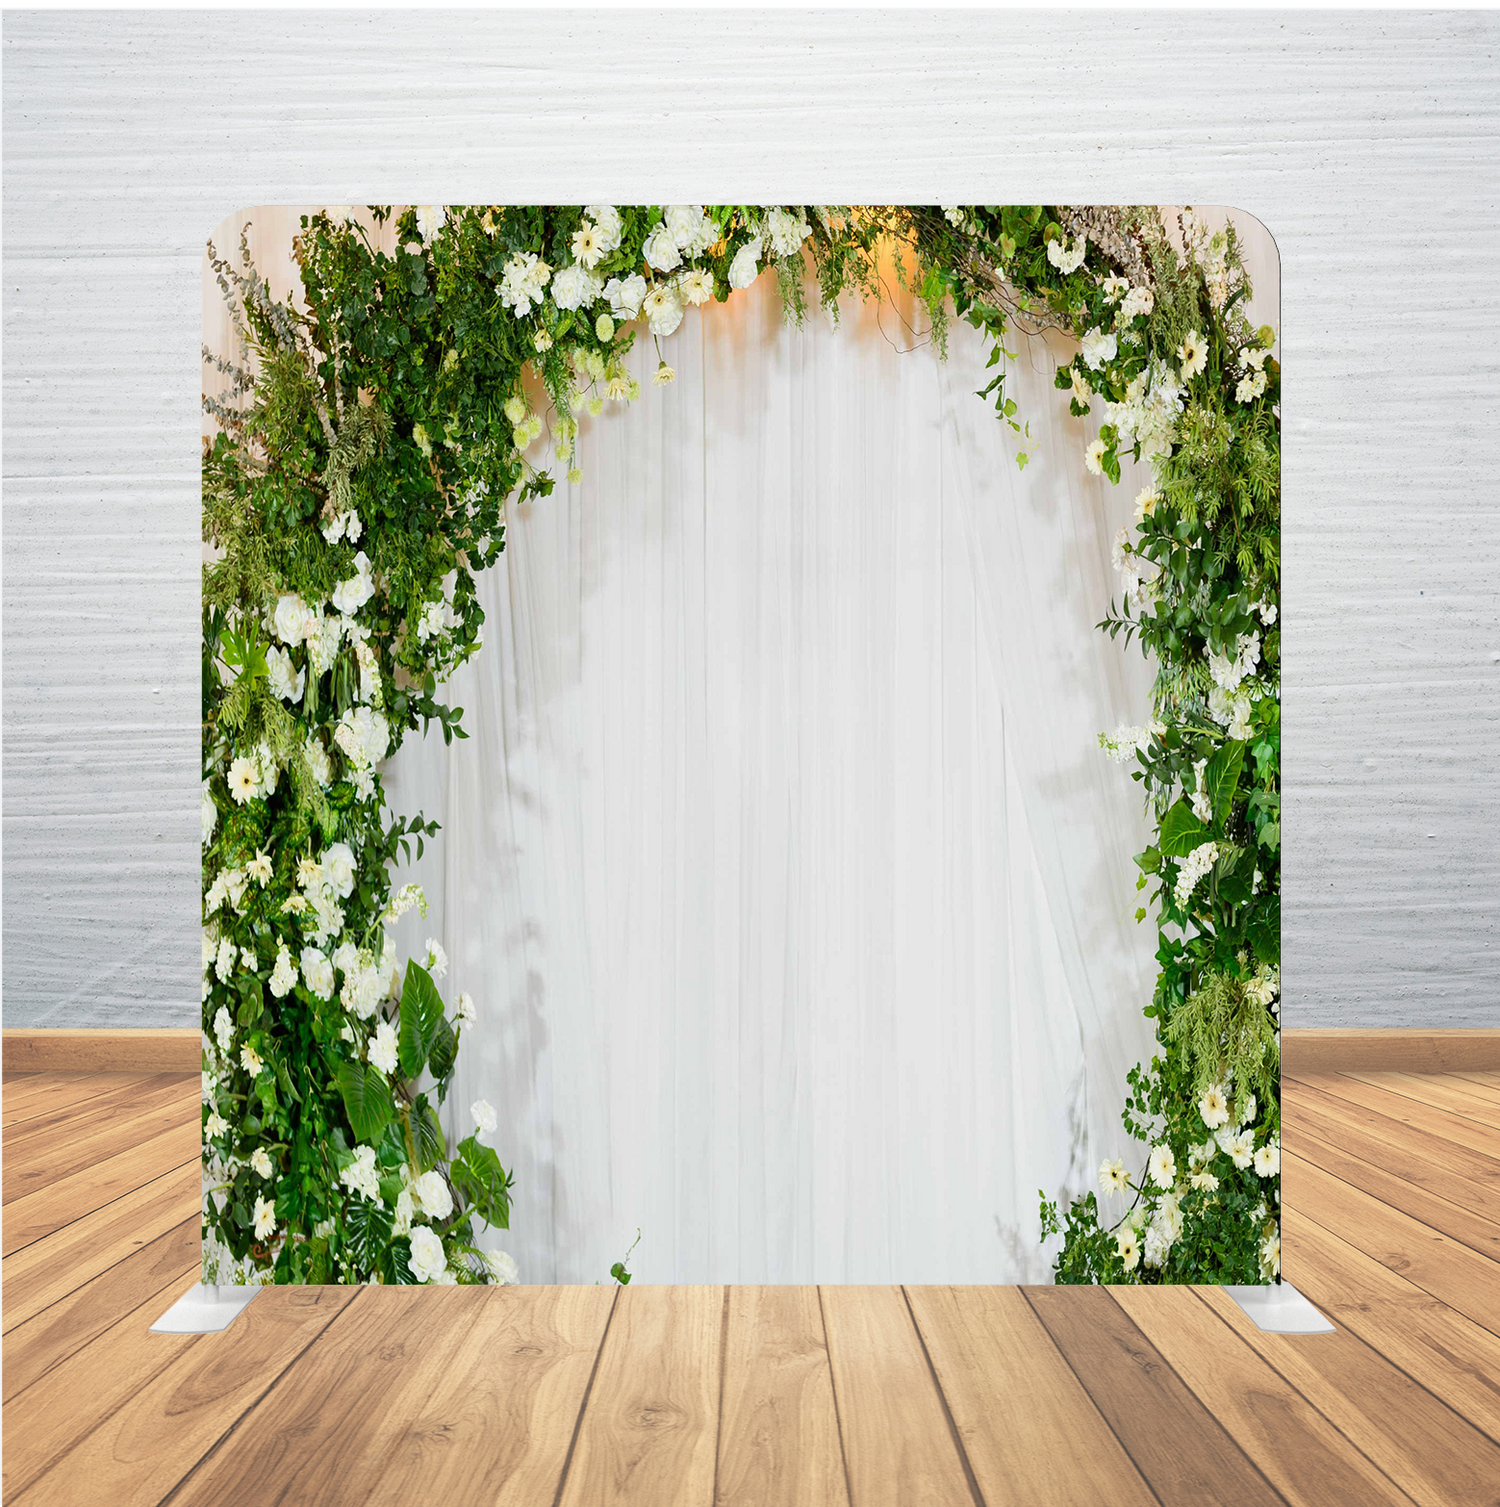 8X8 Pillowcase Tension Backdrop- Greenery All The Way Around